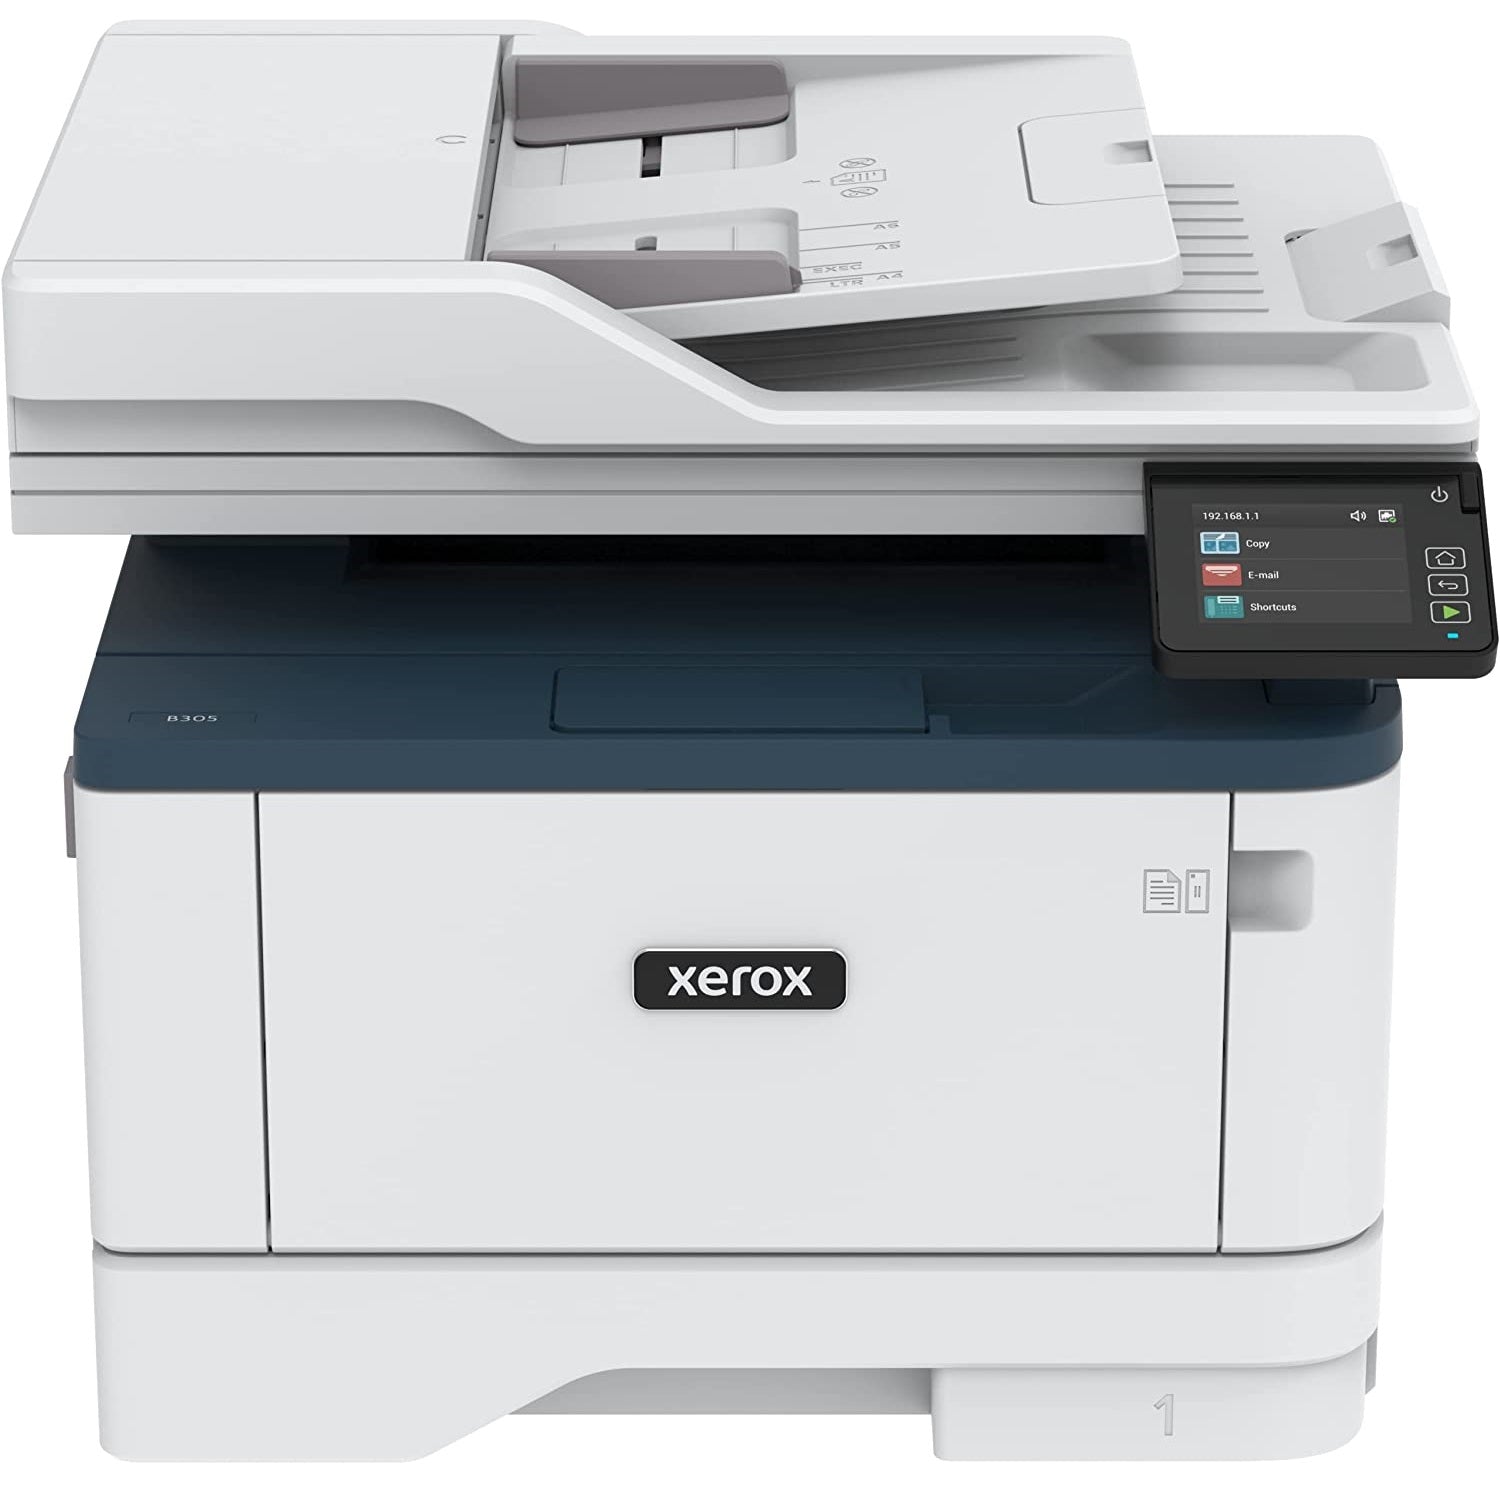 Xerox B305/DNI 40PPM Wireless Black and White Multifunction Laser Printer, Print/Scan/Copy - Capacity 350 sheets, A4/Legal